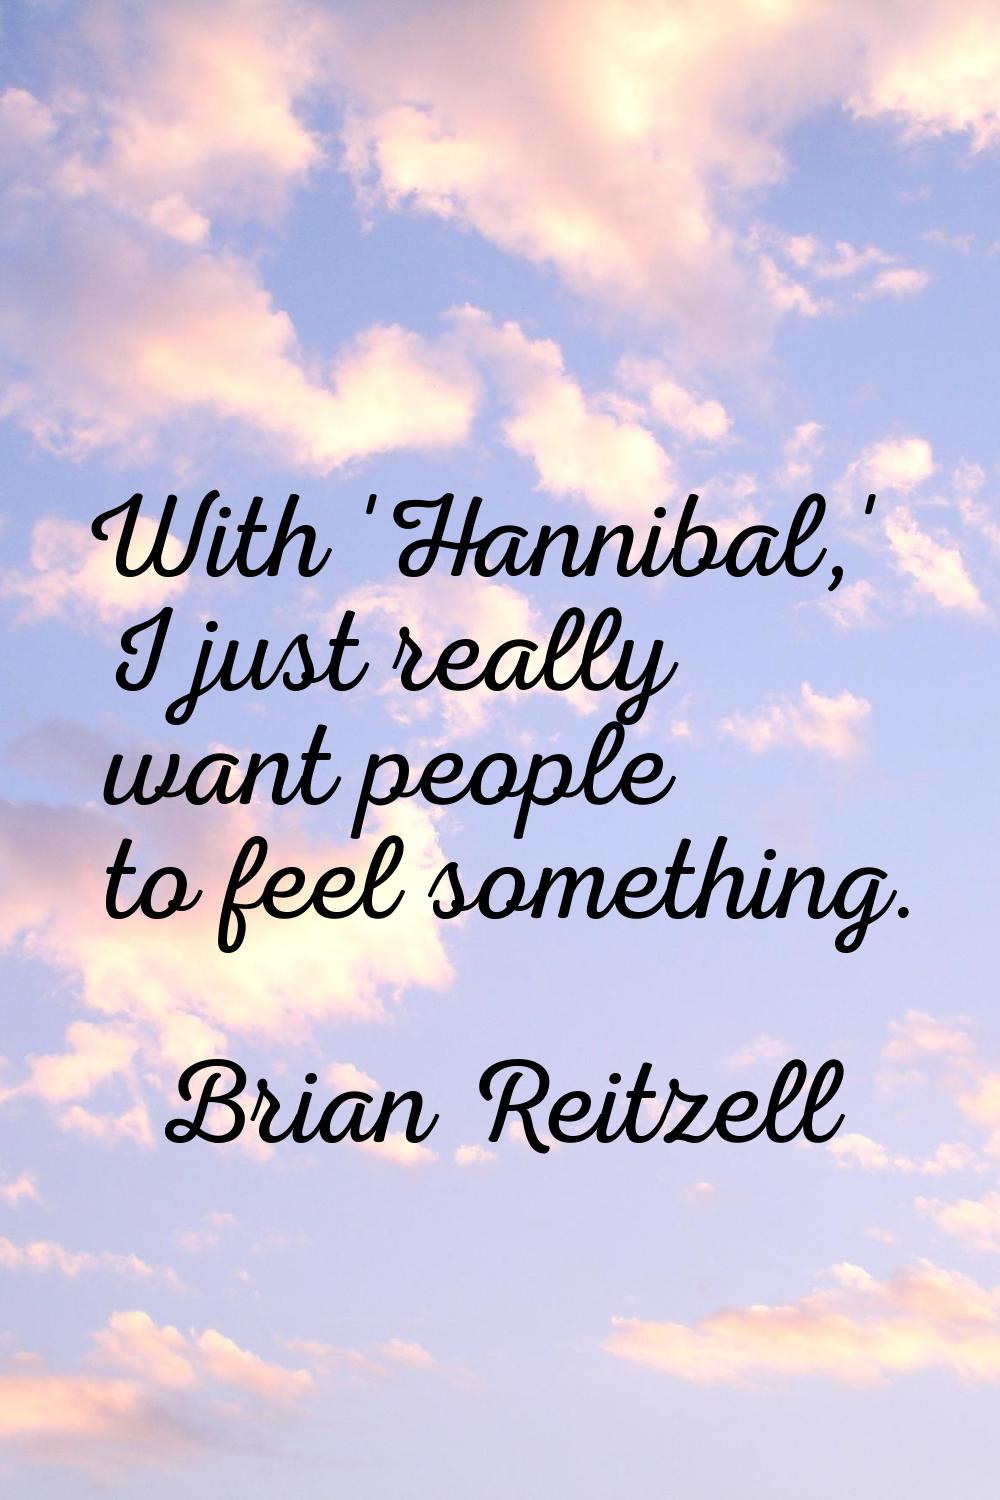 With 'Hannibal,' I just really want people to feel something.